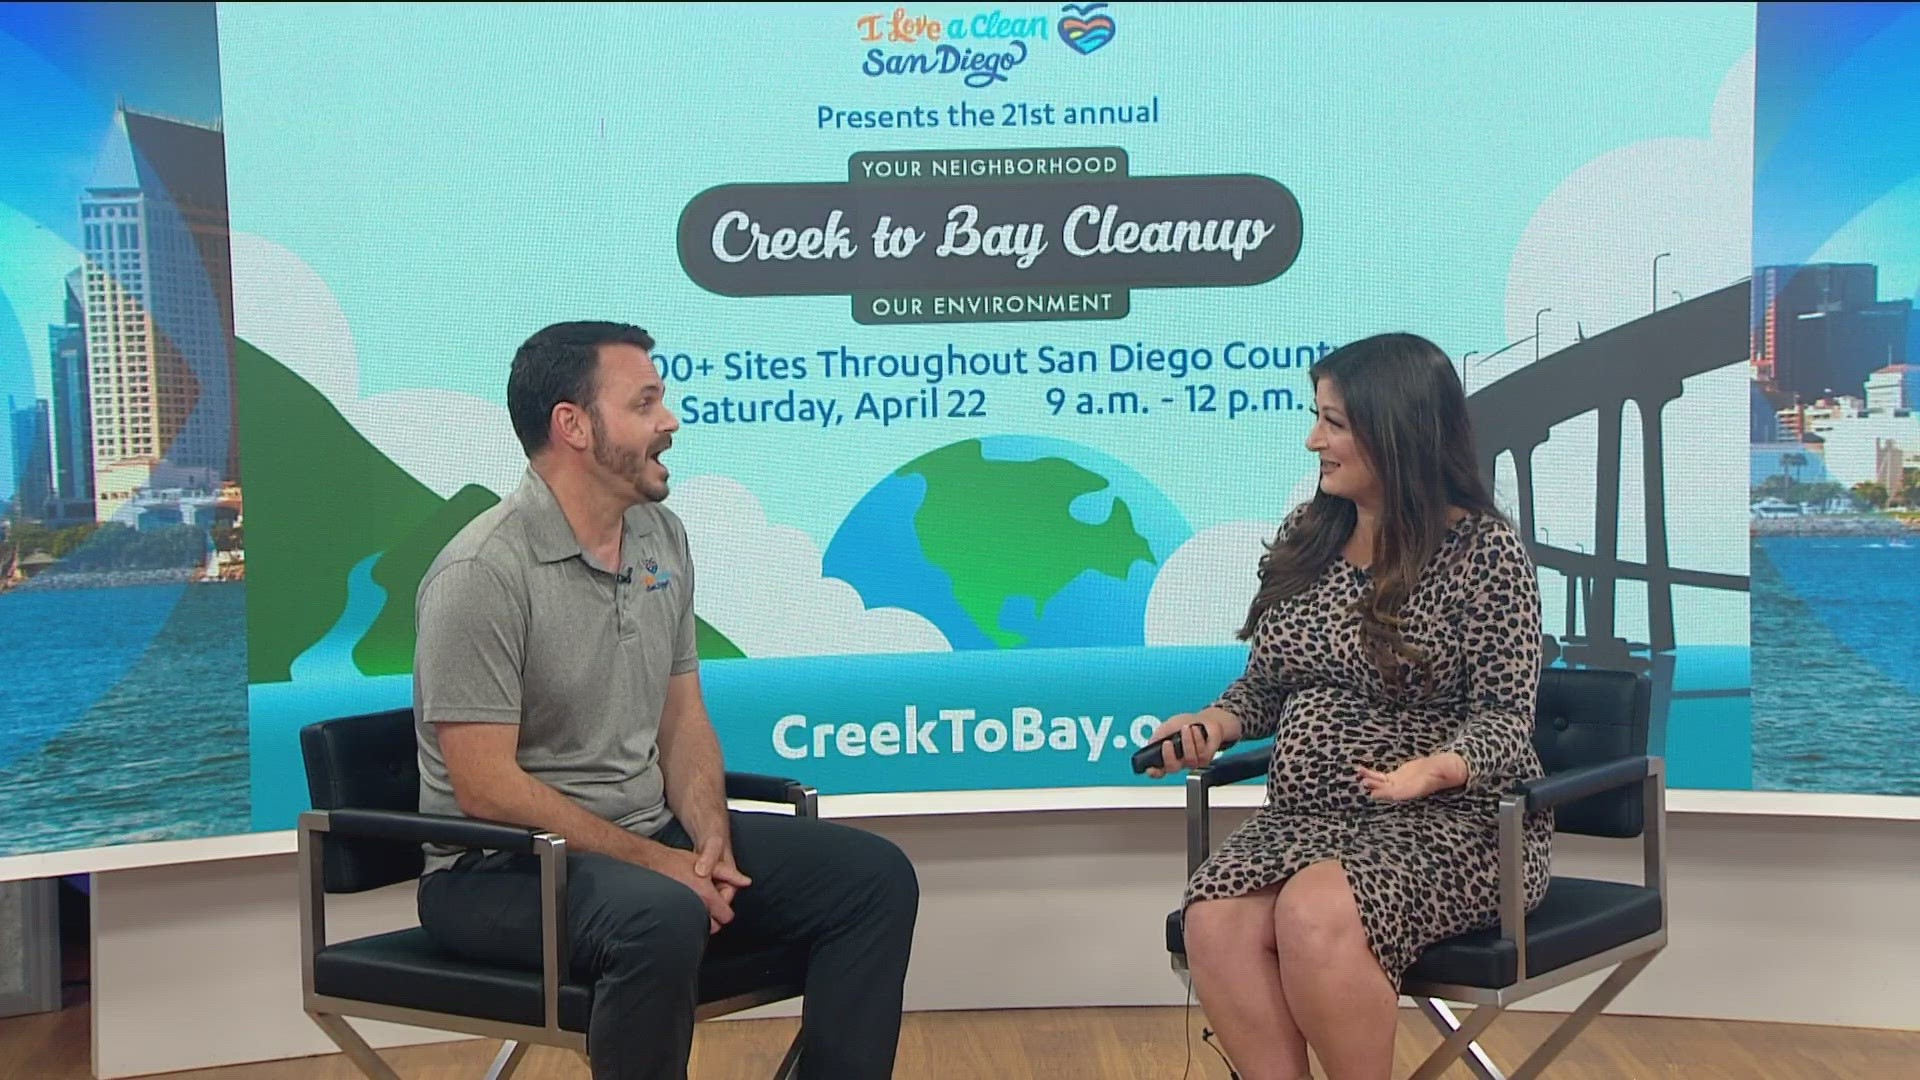 Steve Morris talks about what the Creek to Bay Cleanup is, how many sites there will be and how you can participate.